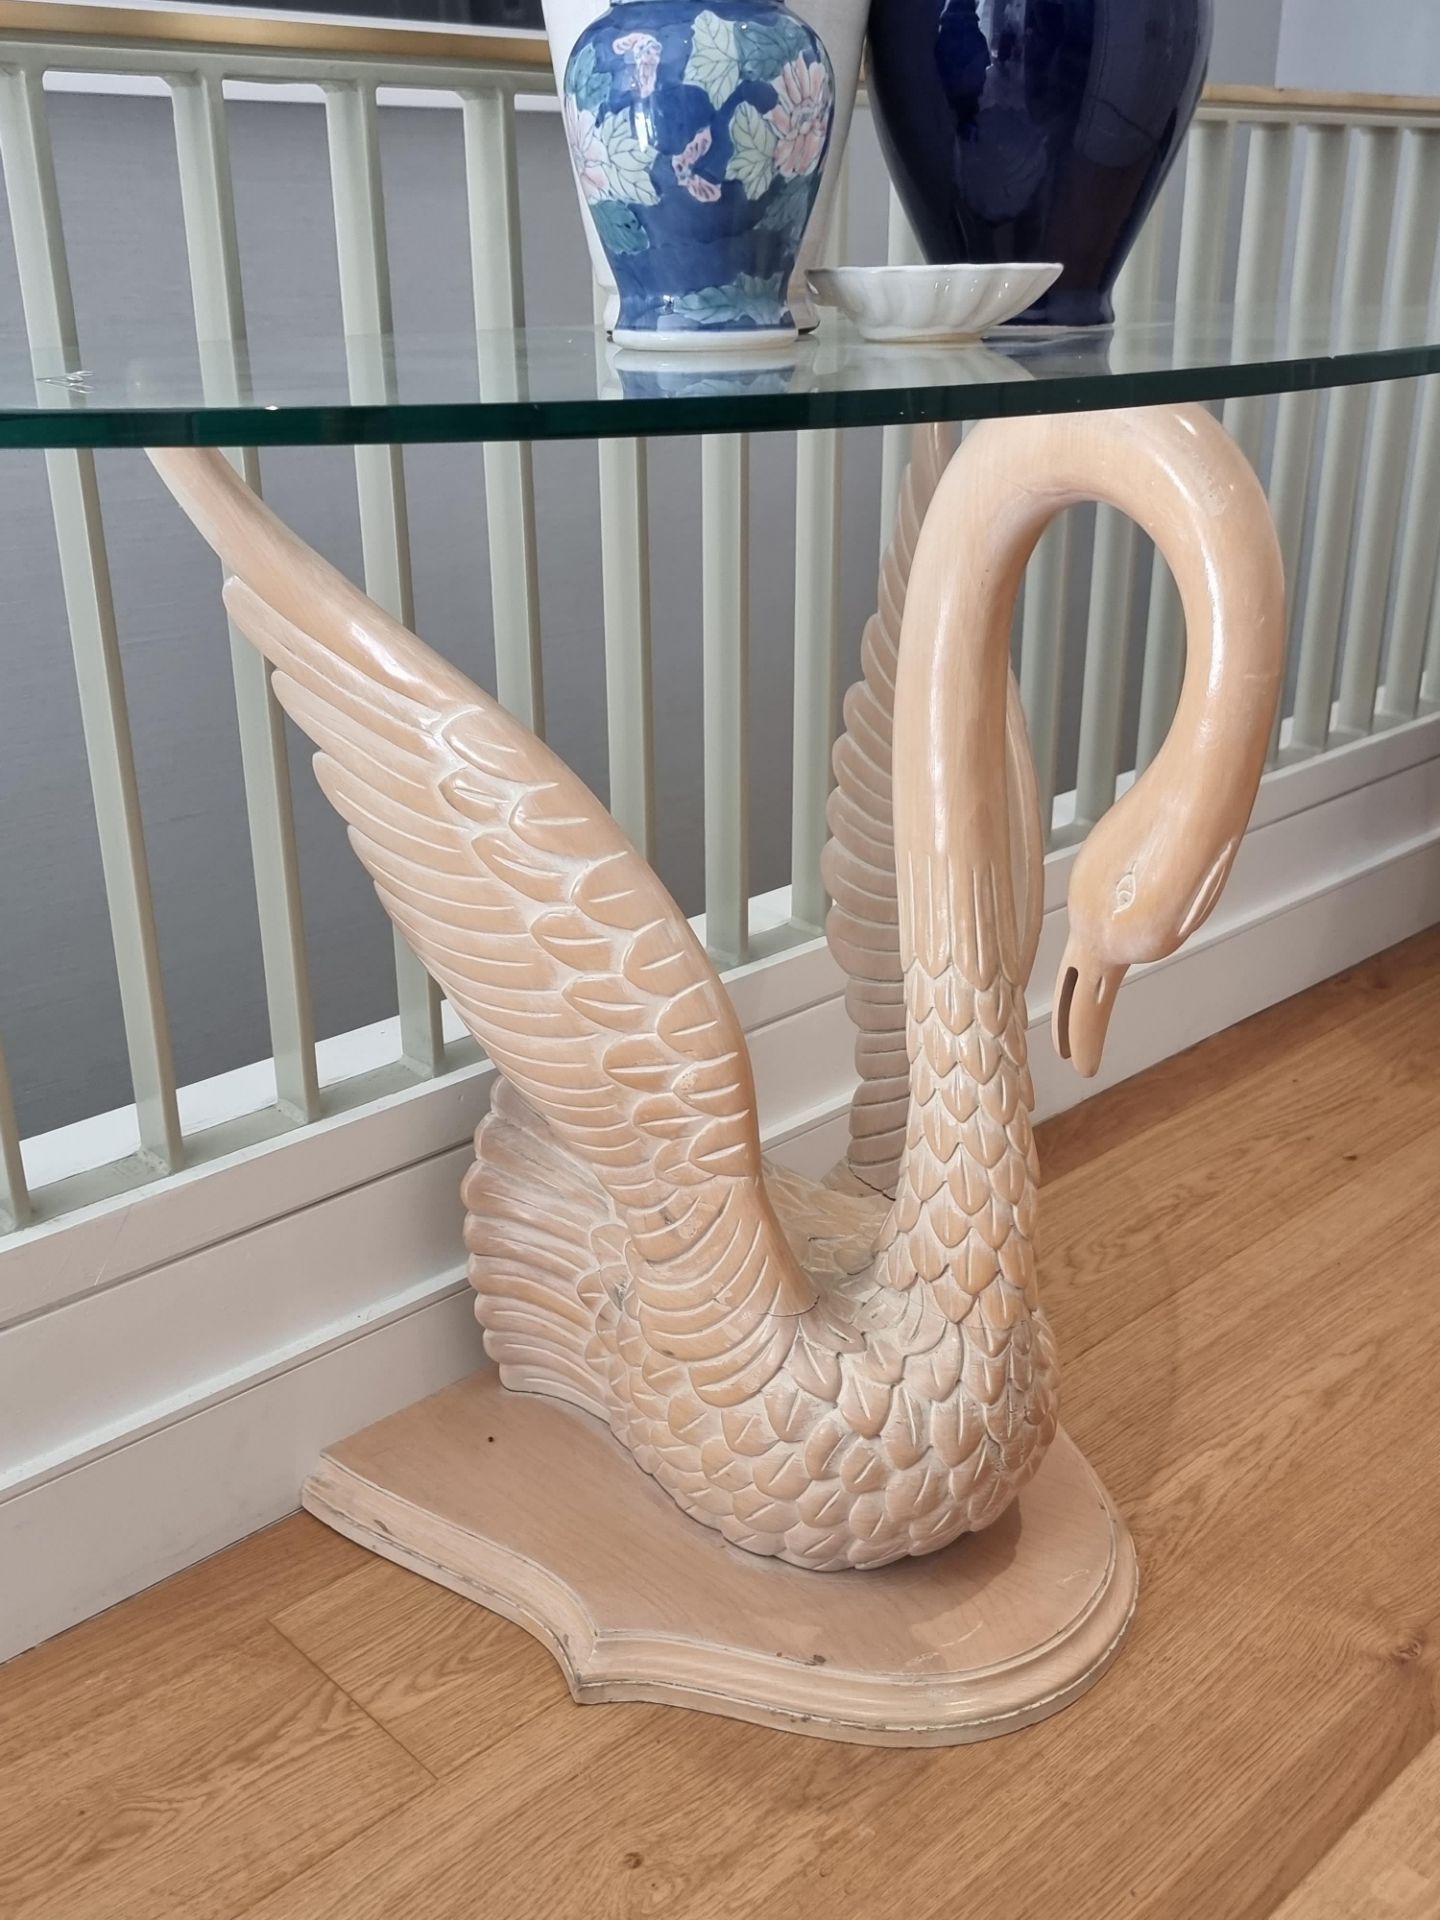 Swan Table Crafted In A Decadent Hollywood Regency Styling, This Stunning Swan Console Table With - Image 2 of 5